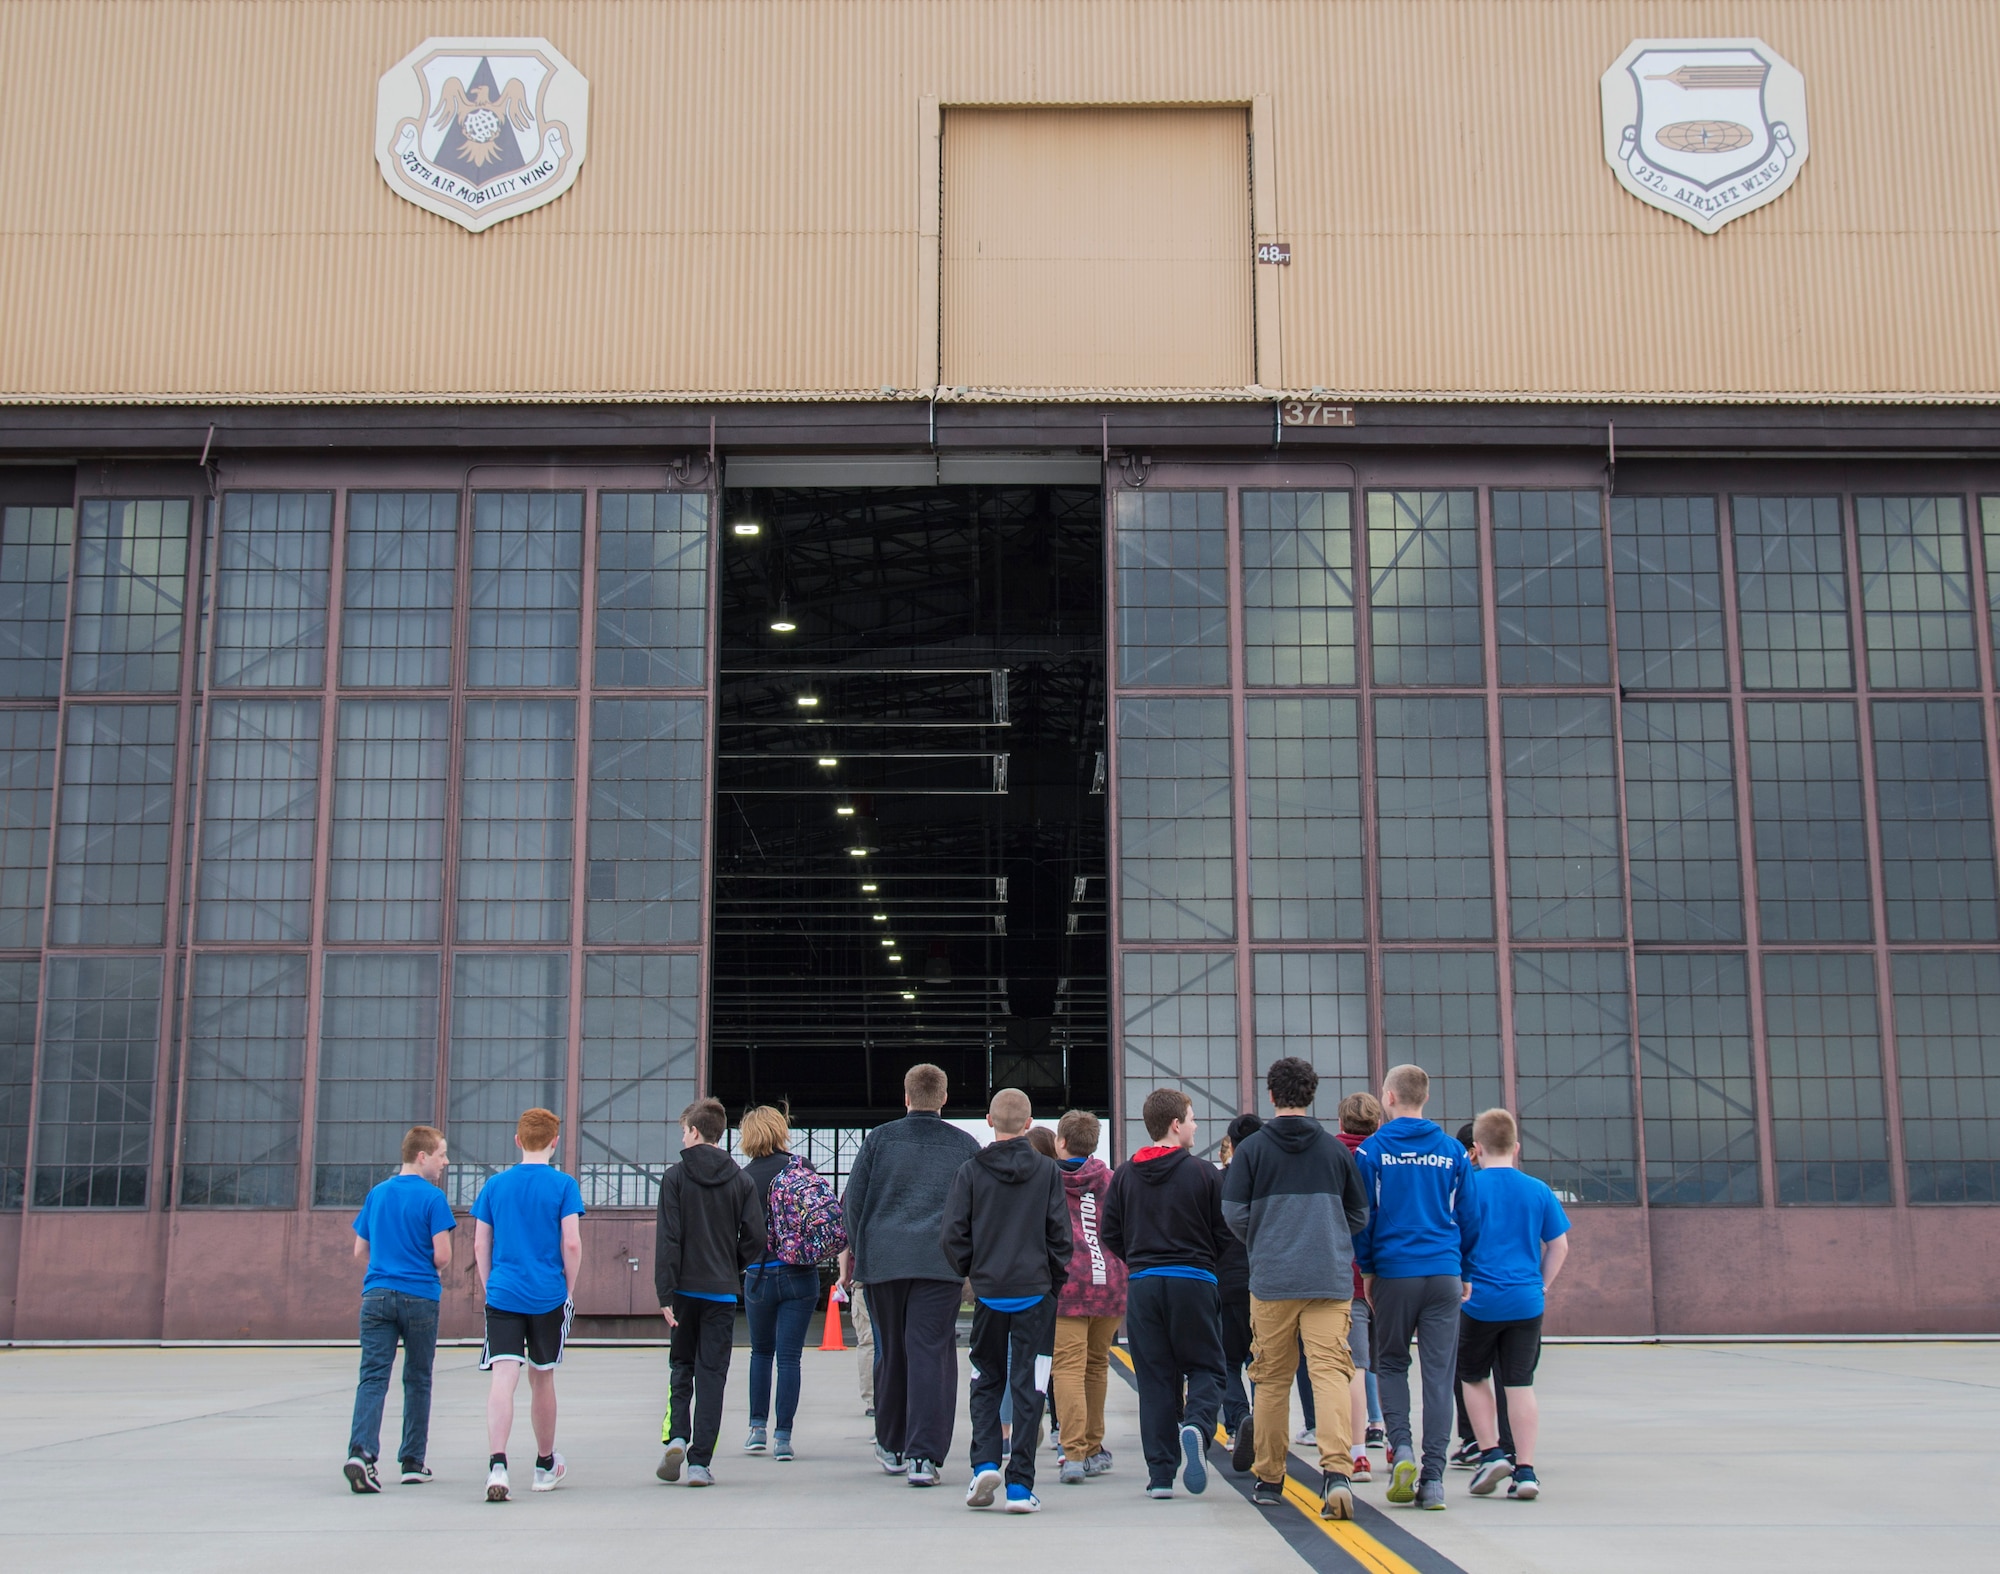 Students from Albers Elementary School enter Hangar 1 at the beginning of the 2019 science, technology, engineering, arts, and math day celebration at Scott Air Force Base, Ill., March 28, 2019. Over 450 students from schools in Illinois and Missouri traveled to Scott AFB for STEAM day which allowed members of team Scott use the elements of STEAM in their daily job. (U.S Air Force photo by Airman 1st Class Nathaniel Hudson)